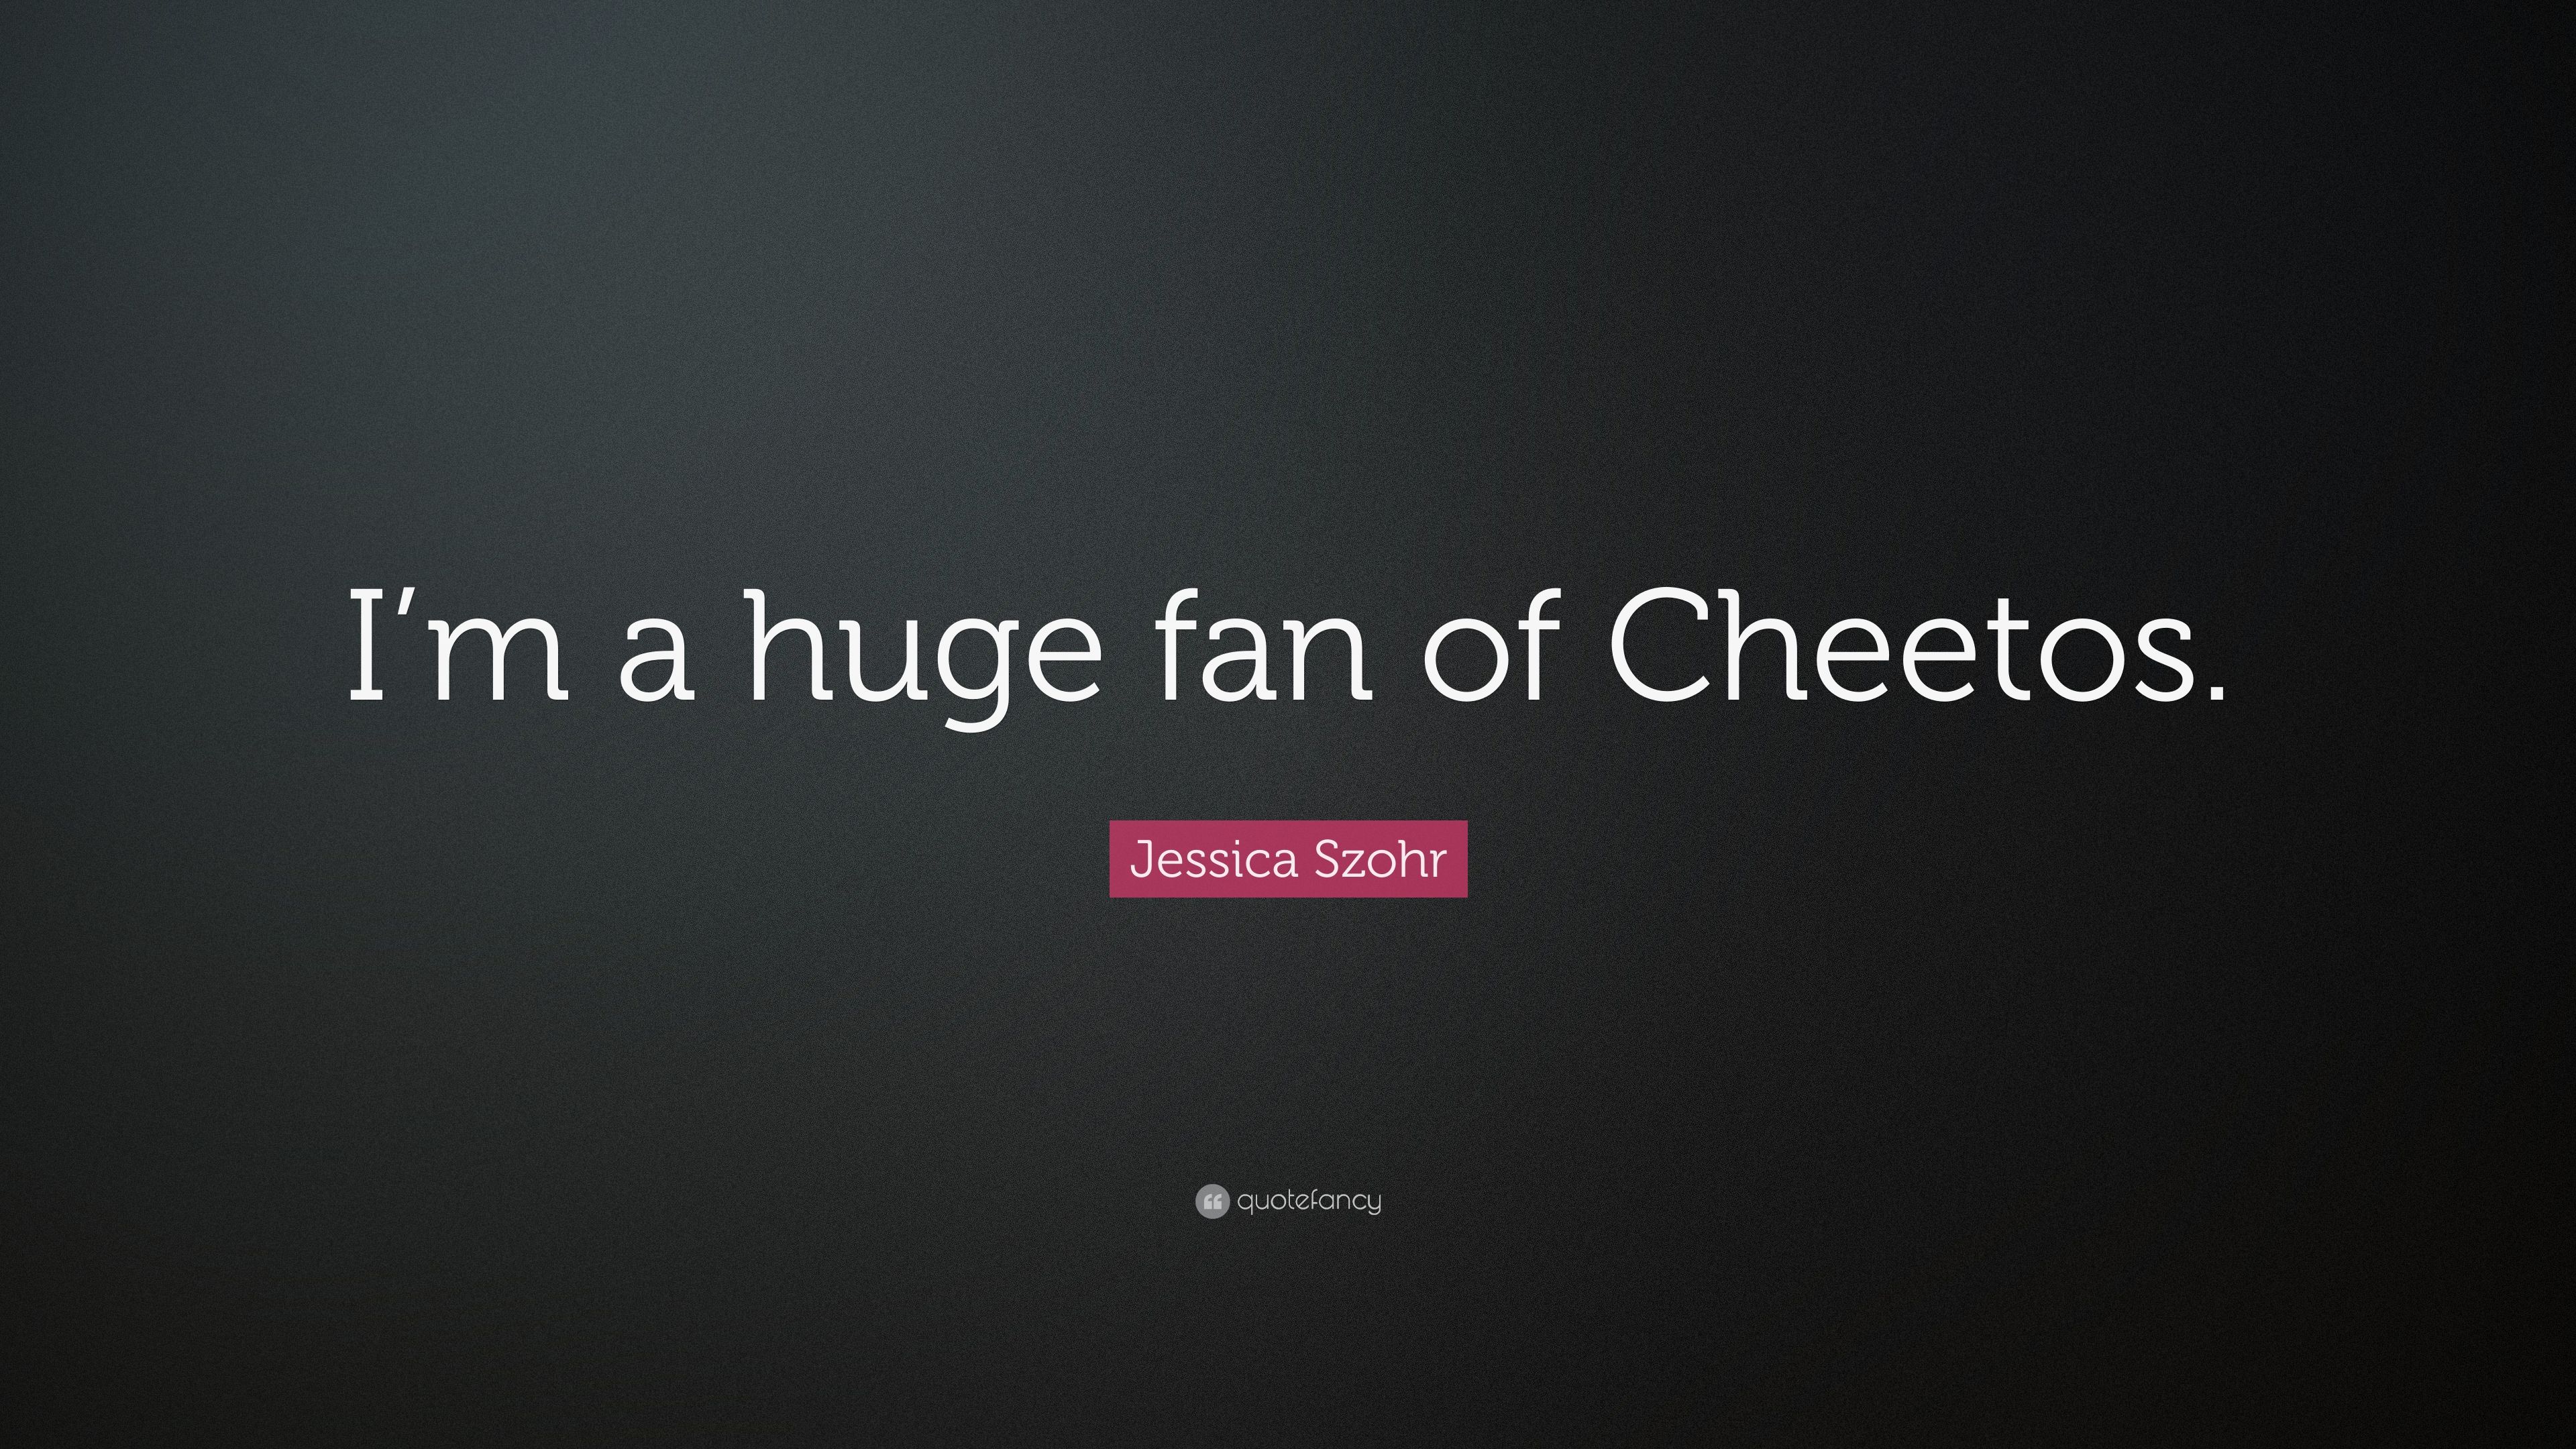 Jessica Szohr Quote: “I'm a huge fan of Cheetos.” 7 wallpaper